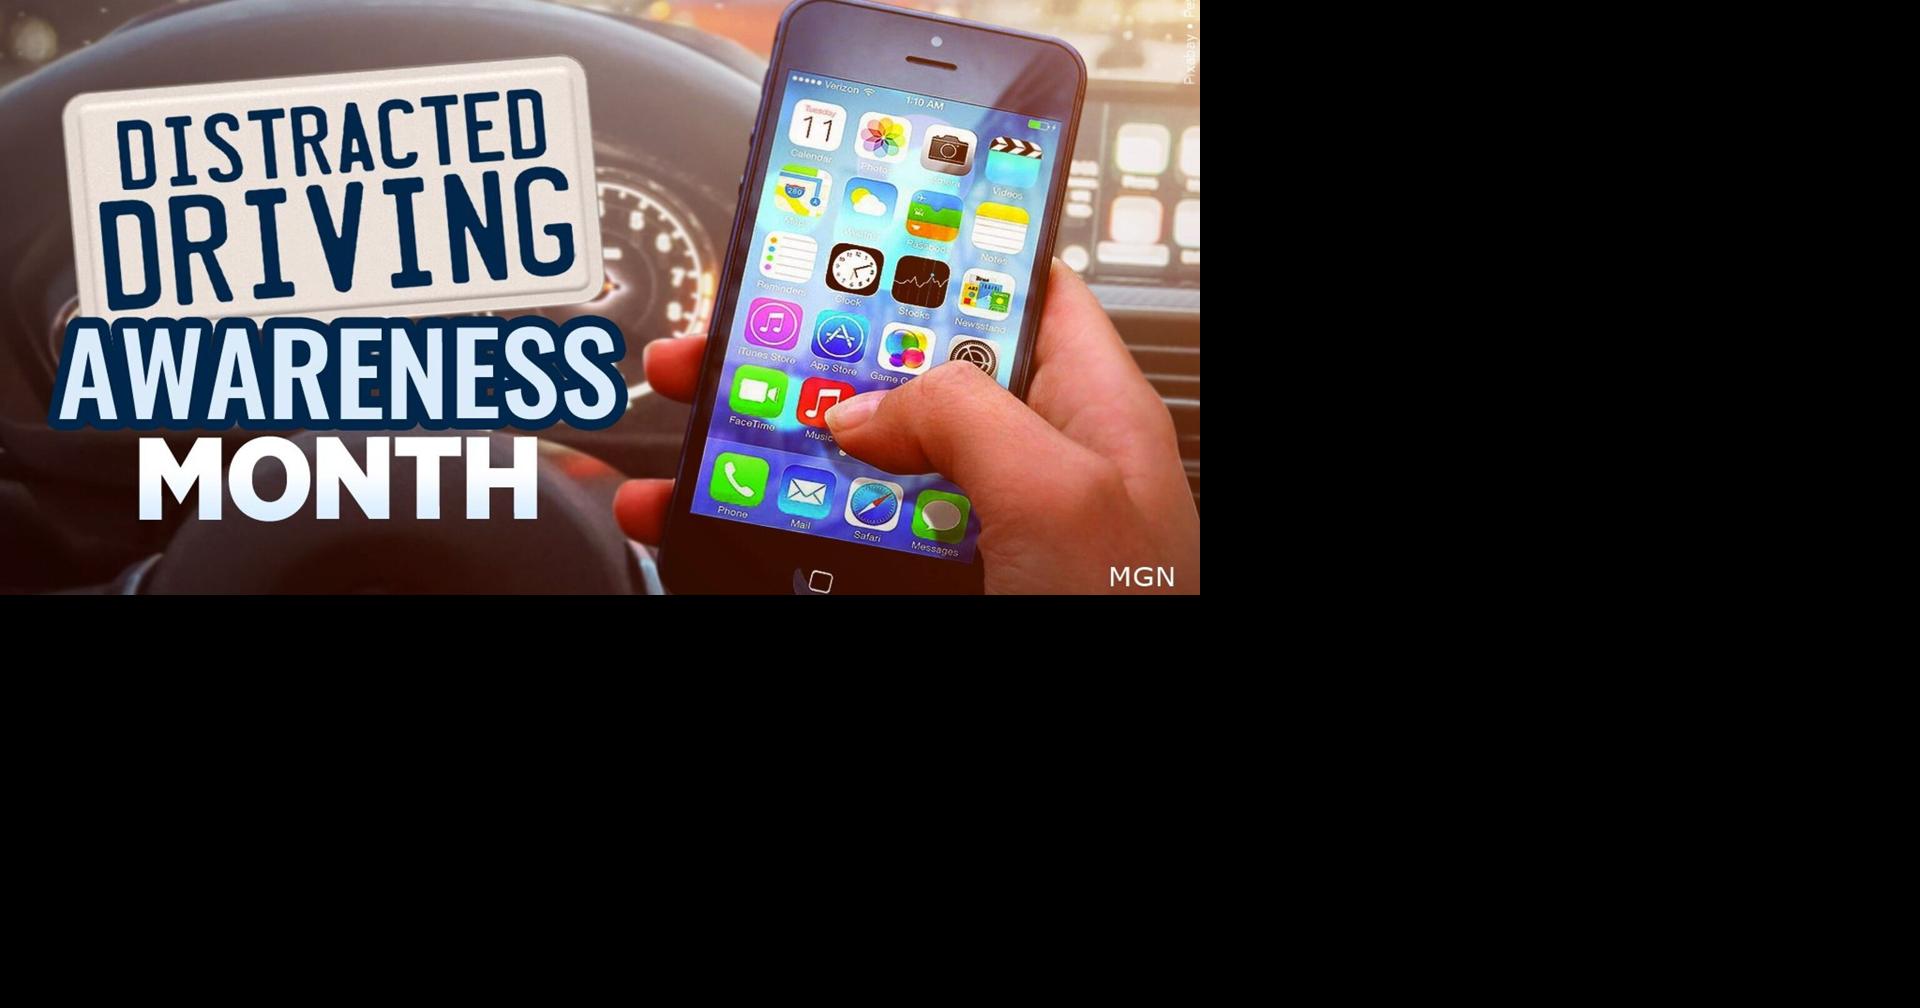 Distracted Driving Awareness Month: How police are cracking down in Pennsylvania, New Jersey